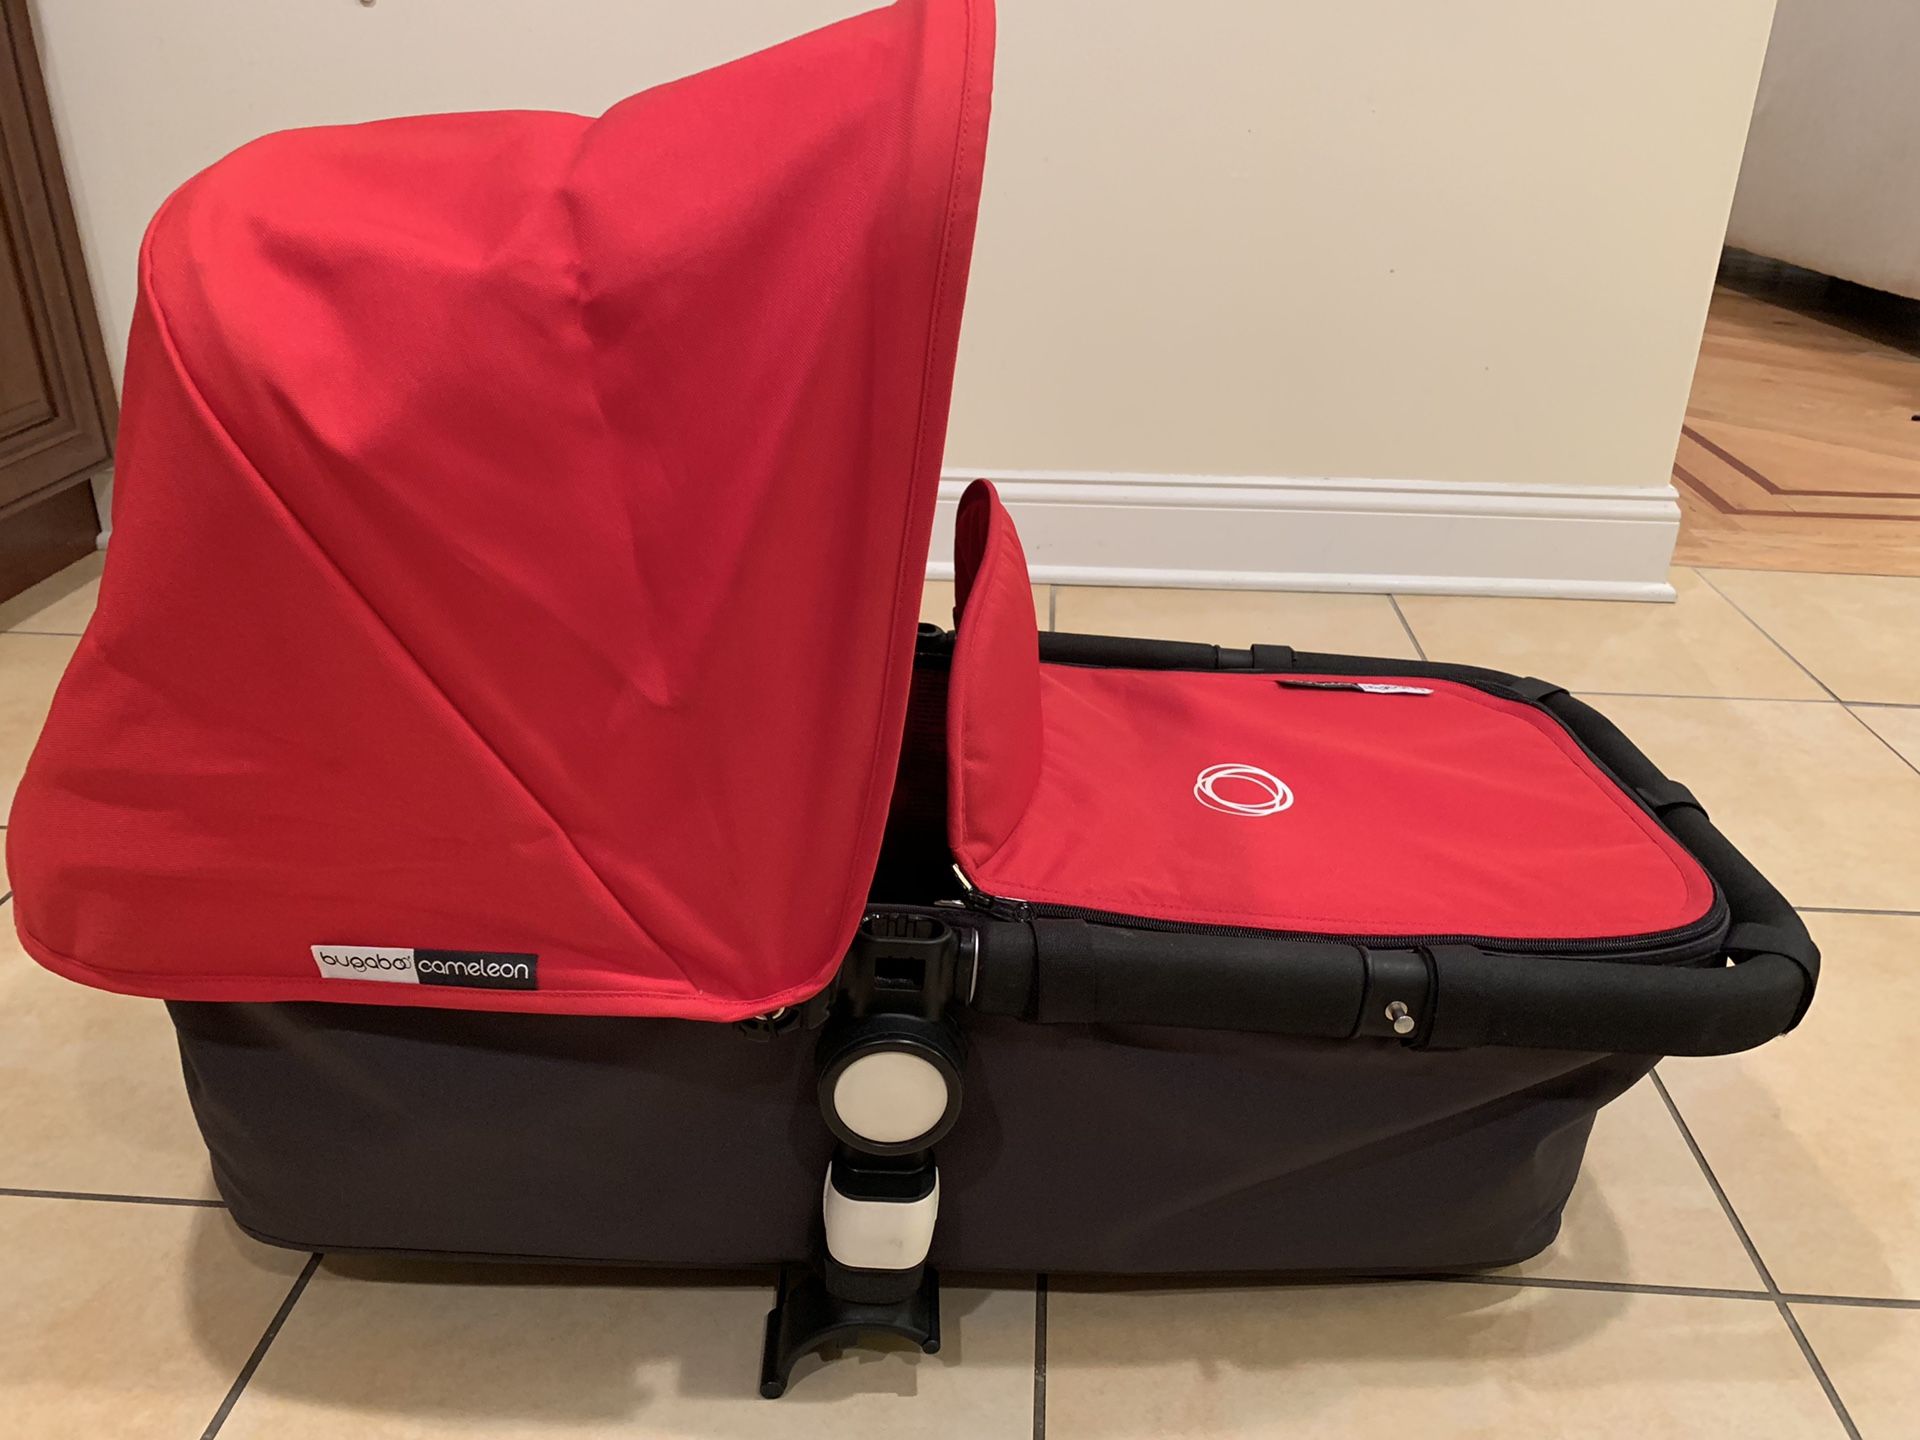 Bugaboo Cameleon stroller with Chicco car seat and bugaboo adopter